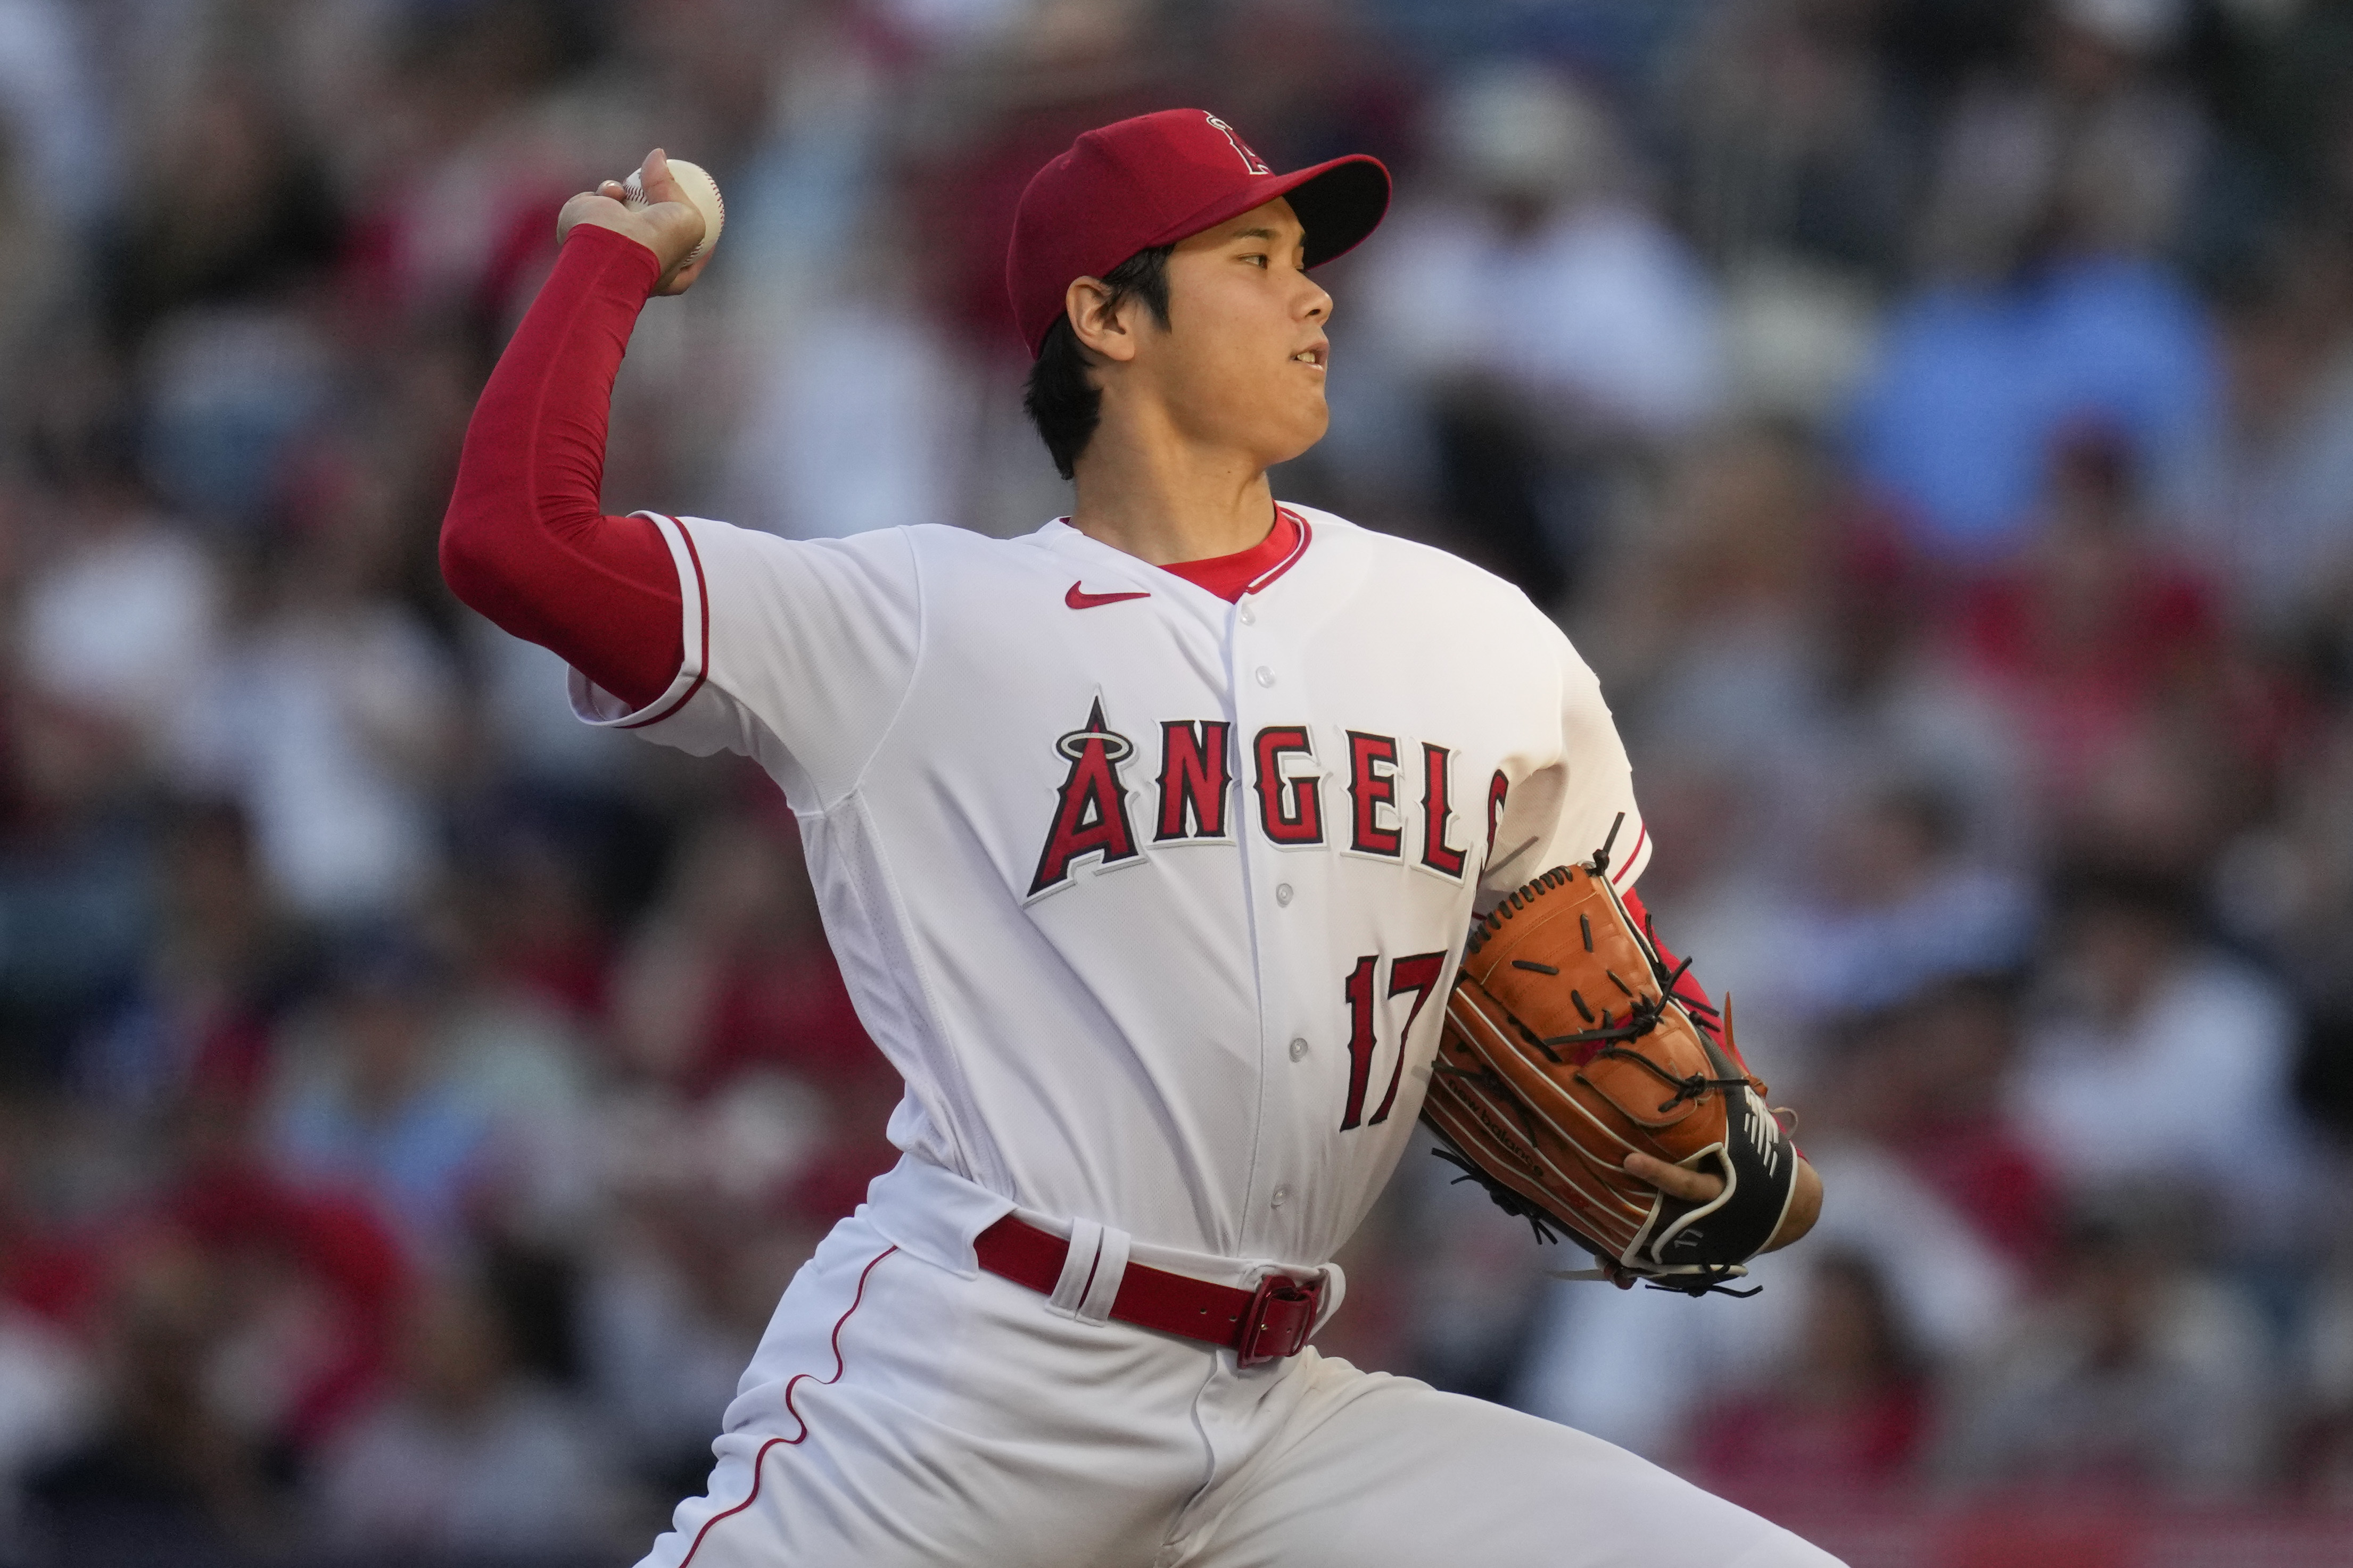 Shohei Ohtani silences Royals, strikes out 11 in 7 innings